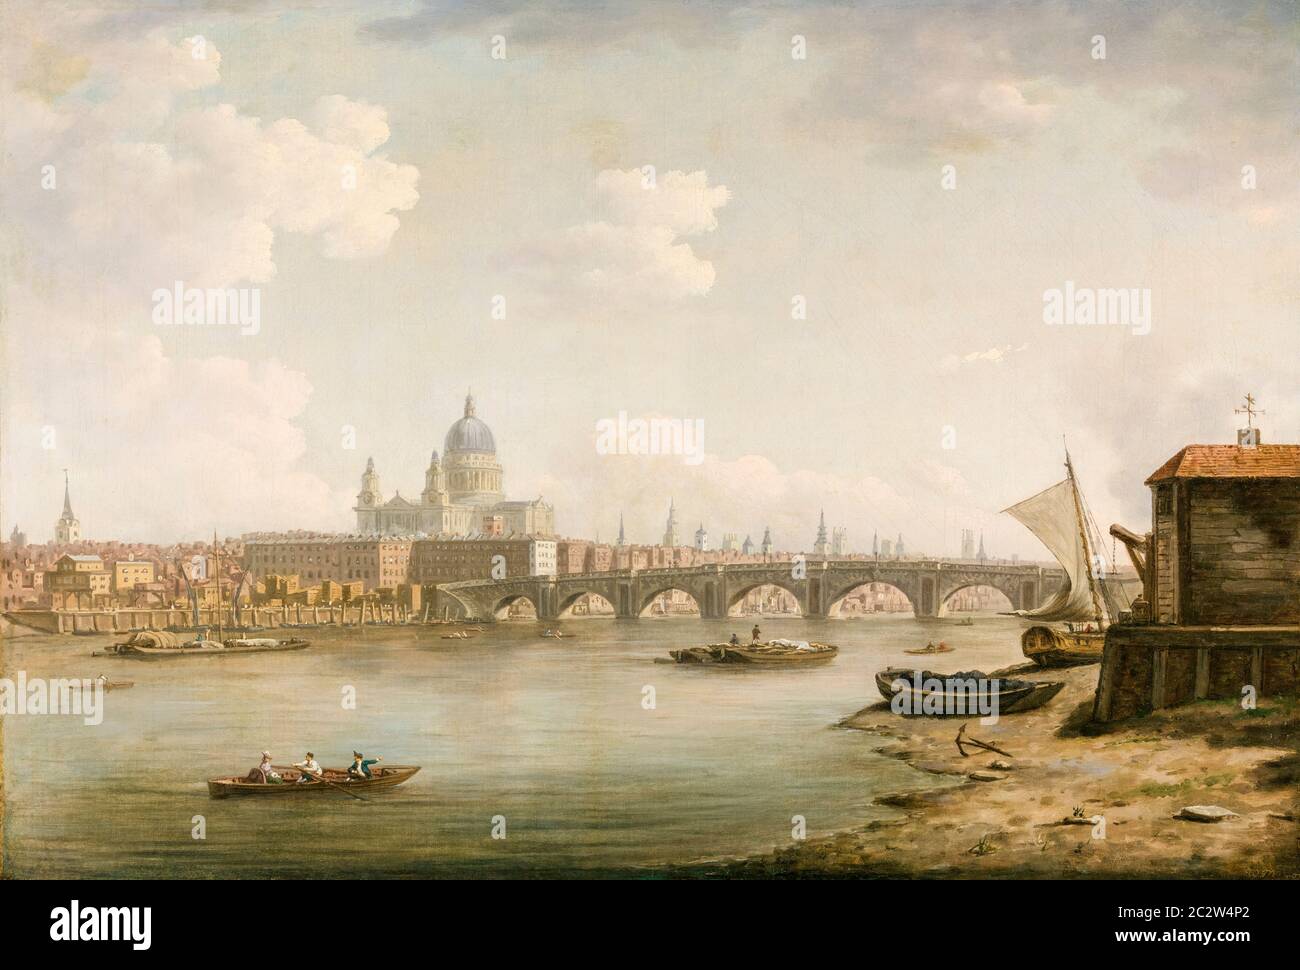 St Pauls Cathedral and Blackfriars Bridge, London, landscape painting by William Marlow, 1770-1772 Stock Photo